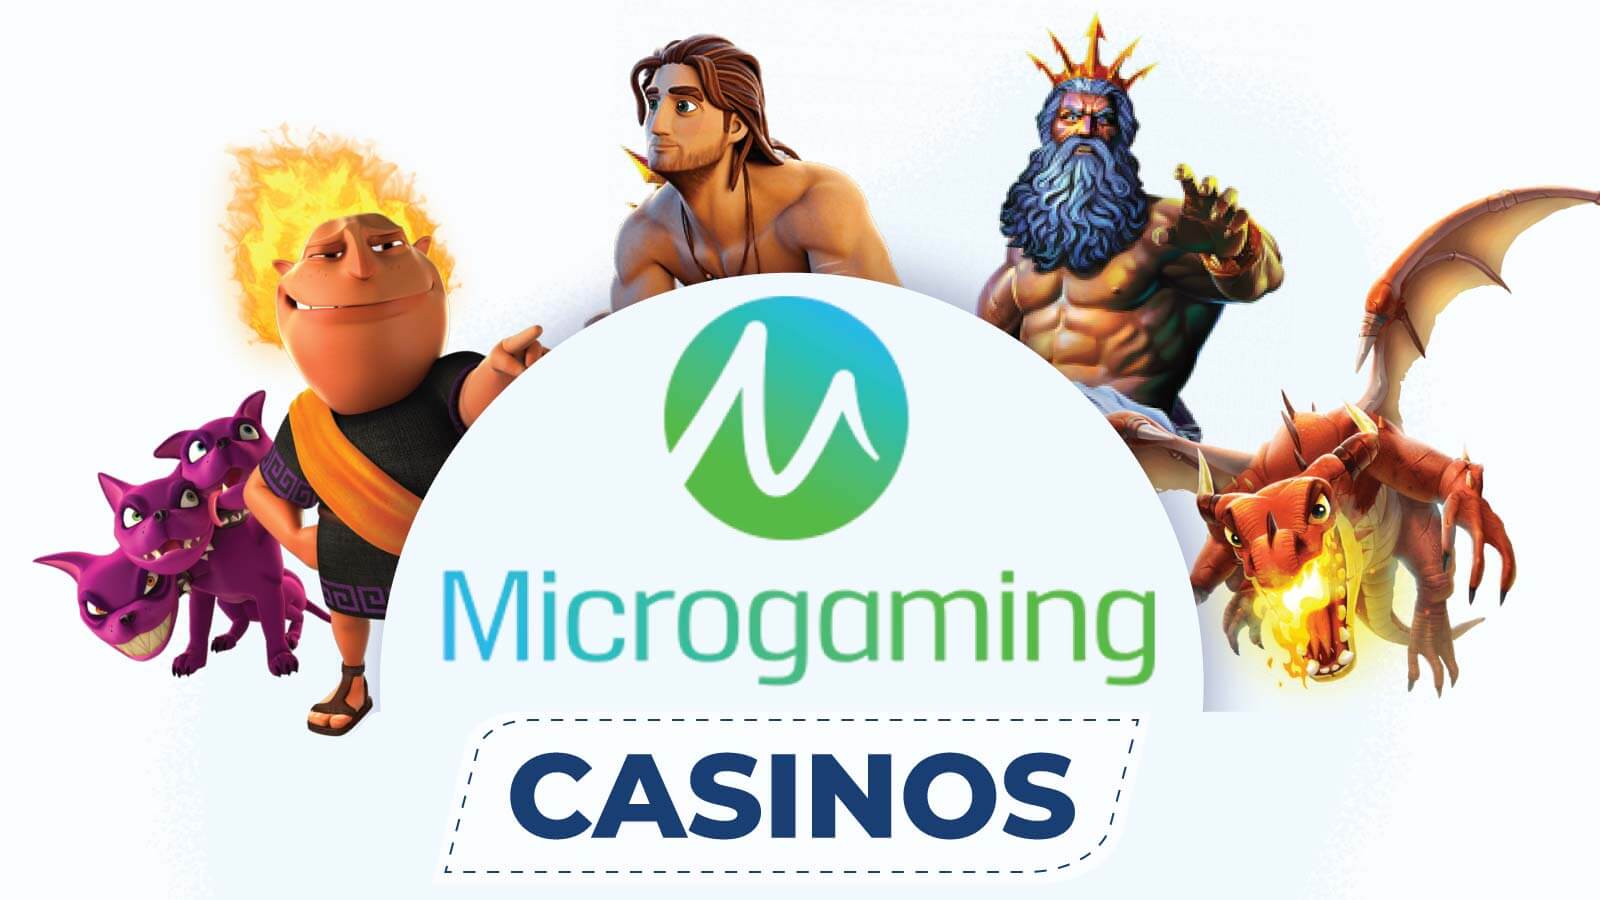 Microgaming Casinos – The Best Bonuses and Latest Games